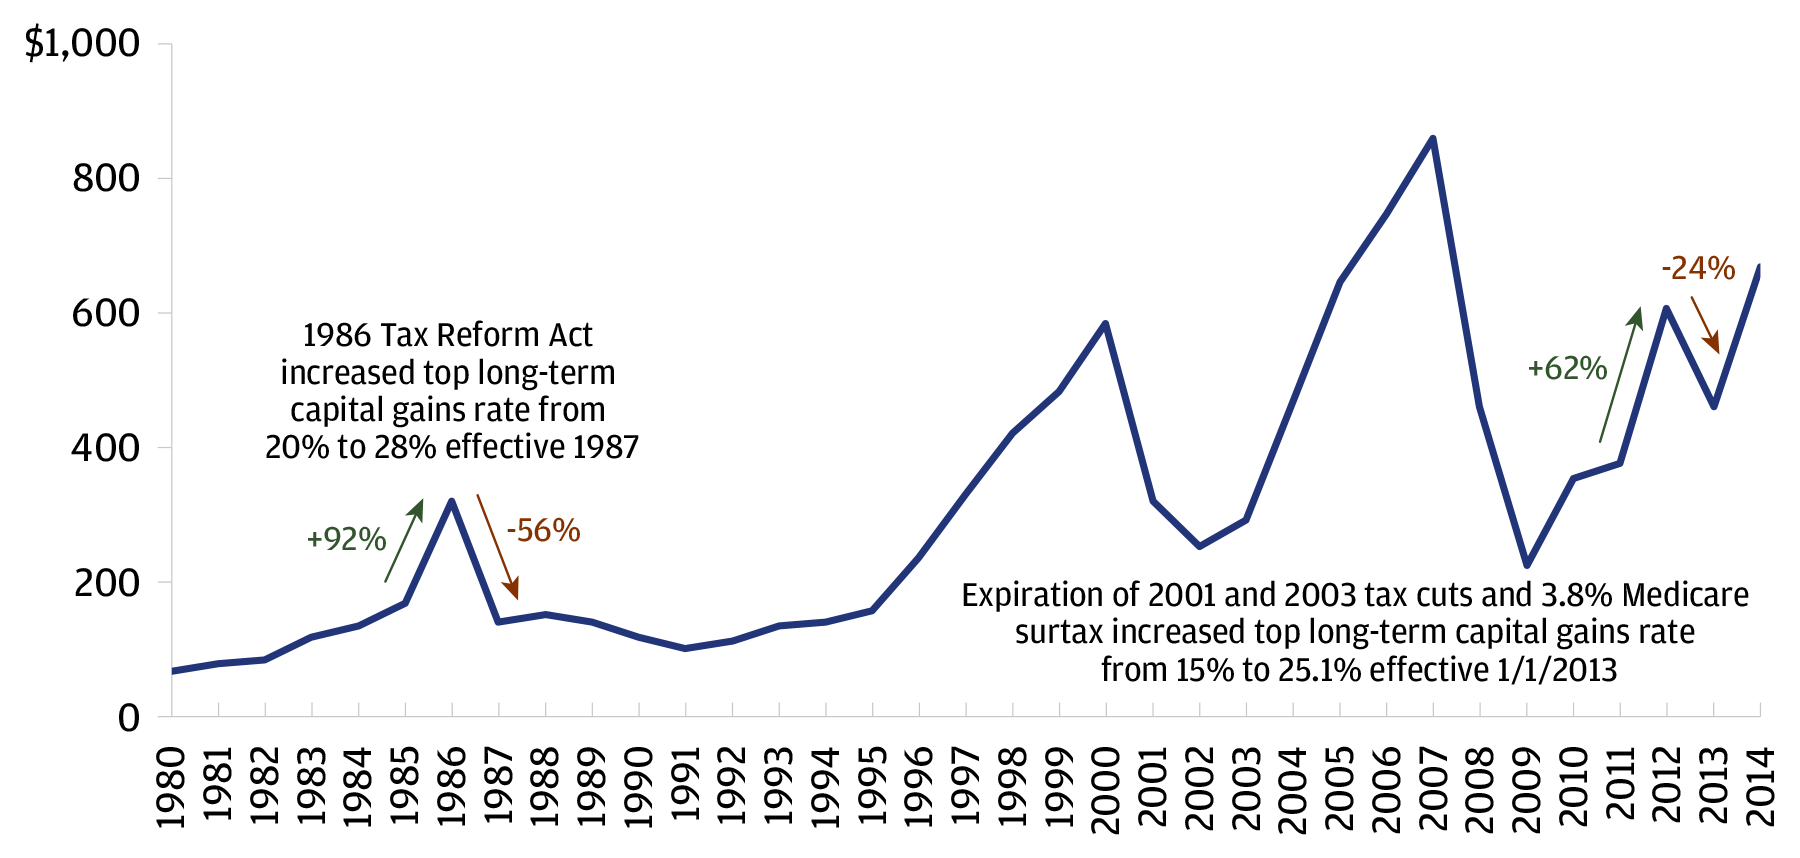 Graph showing realized long-term capital gains between 1980-2014